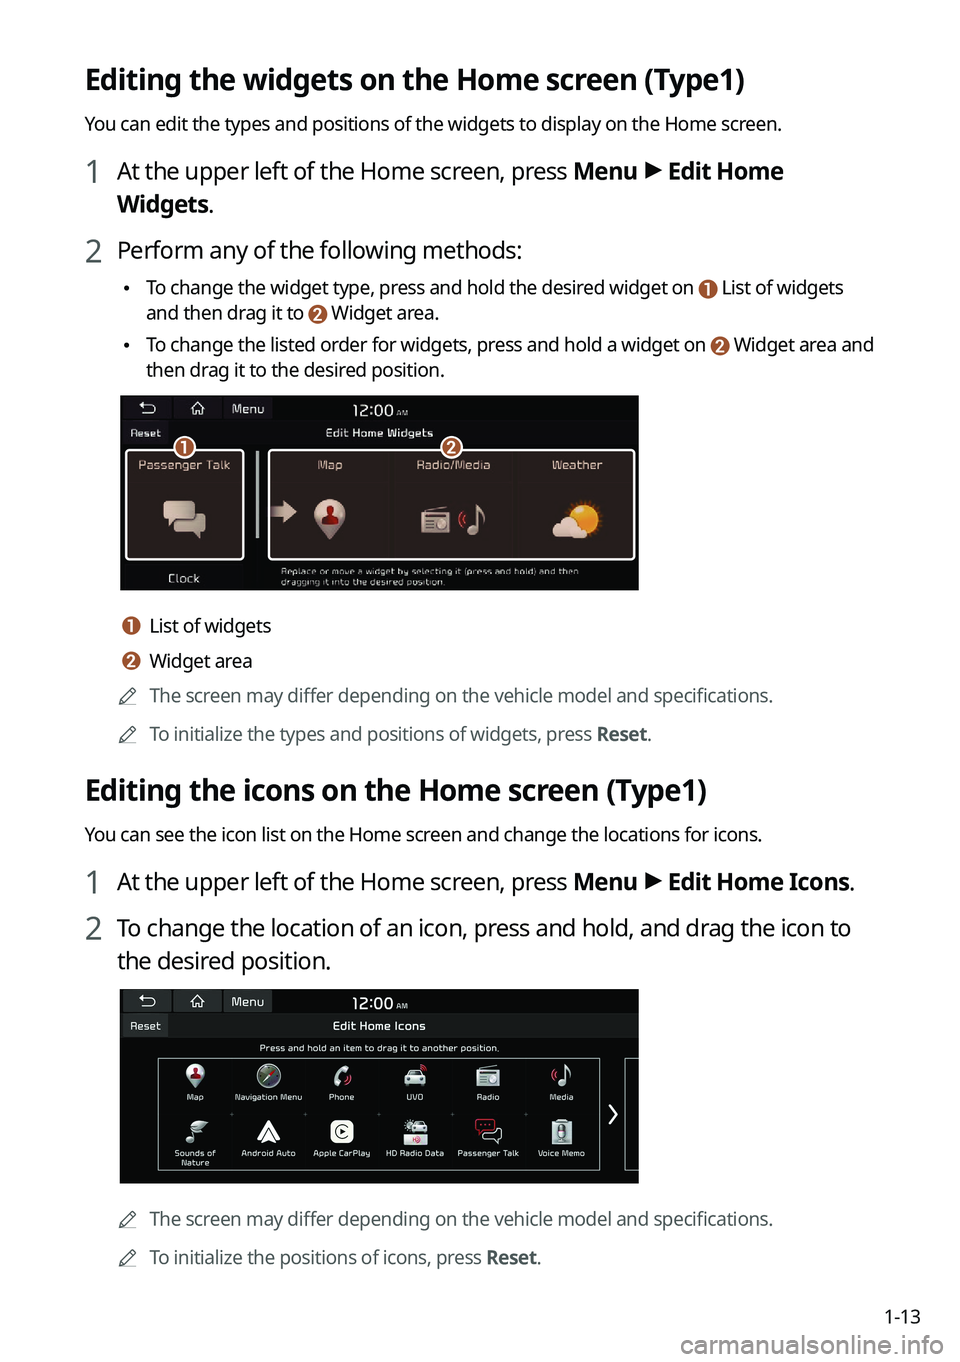 KIA FORTE 2022  Navigation System Quick Reference Guide 1-13
Editing the widgets on the Home screen (Type1)
You can edit the types and positions of the widgets to display on the Hom\
e screen.
1 At the upper left of the Home screen, press Menu >
 Edit Home